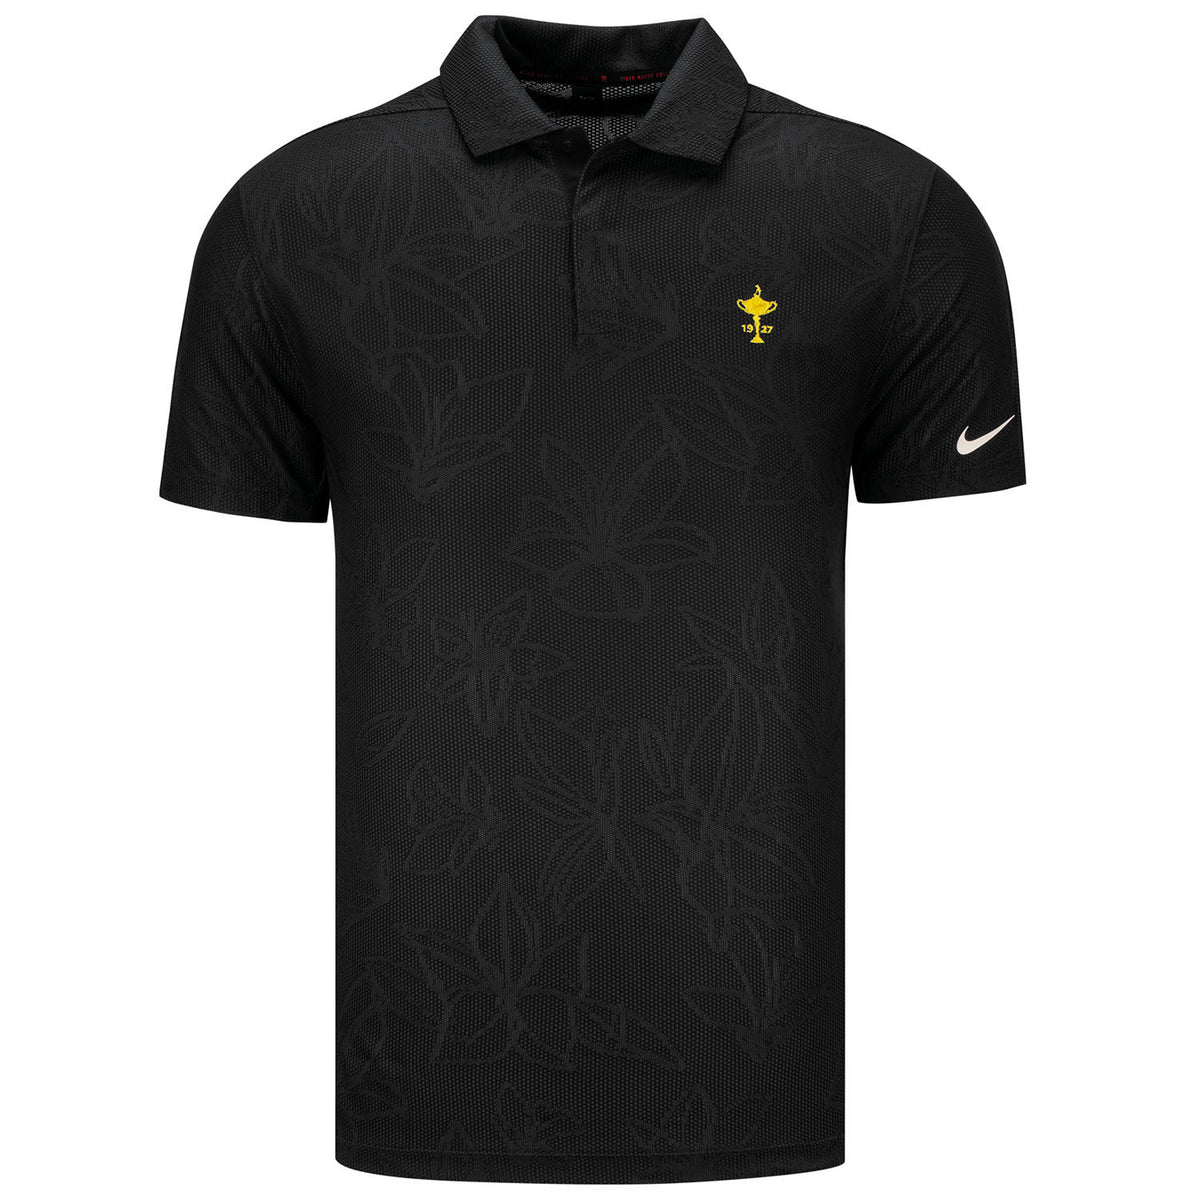 Nike Tiger Woods Floral Jacquard Polo in Black- Front View